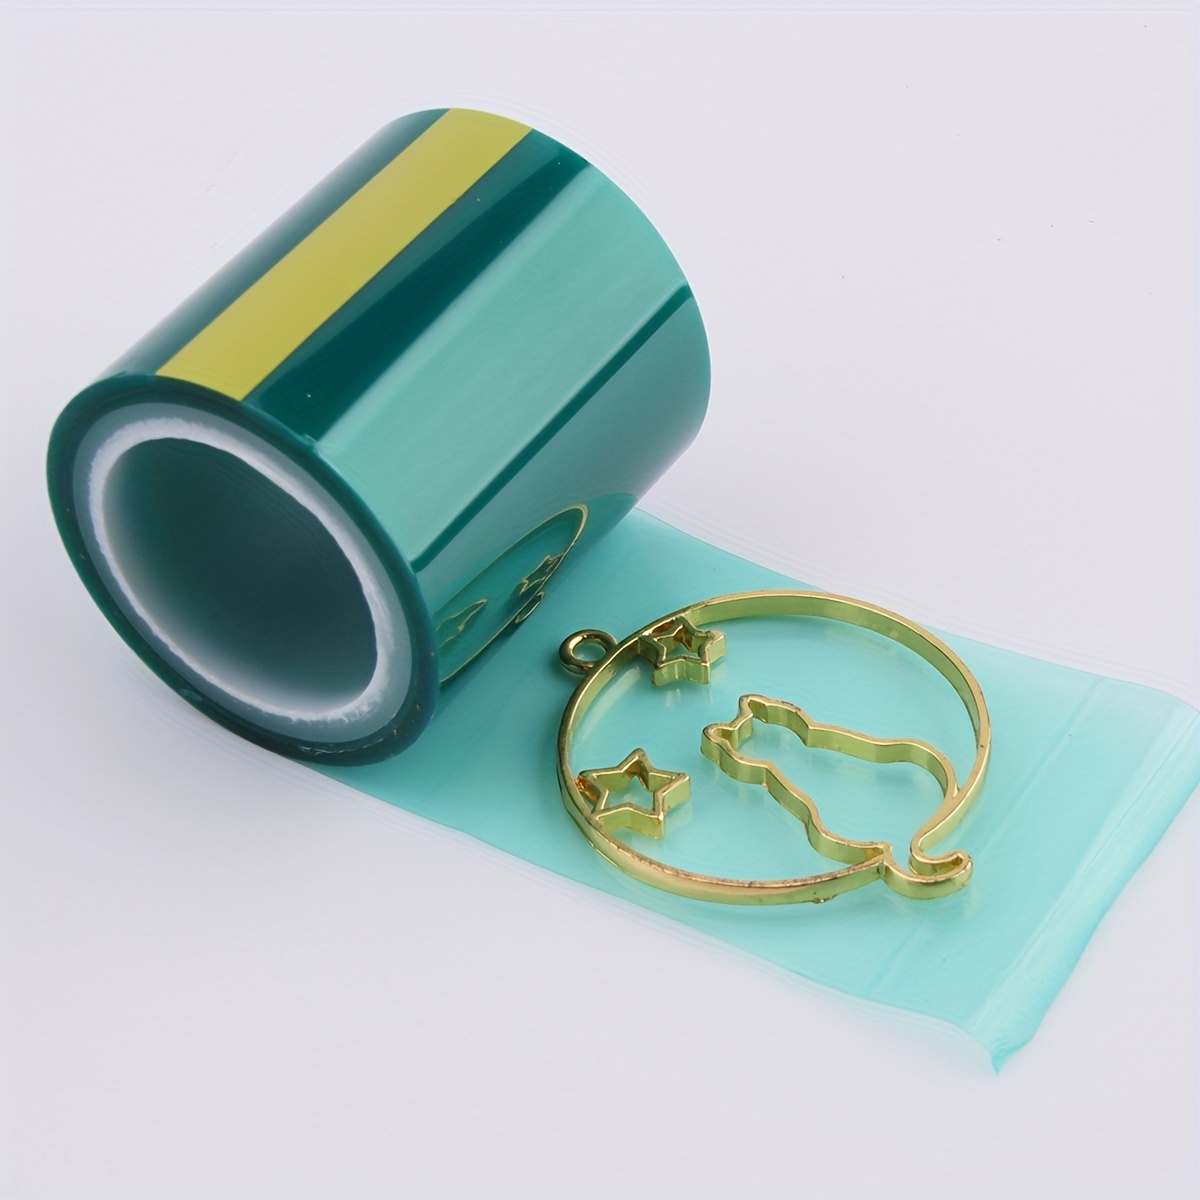 Buy 4 rolls 50mm x 5M Resin Tape Craft Tape for Handmade Craft Tape  Adhesive Paper Tape Adhesive Type Pendant Making Seamless Paper Tape  Accessories Pendant Handmade High Adhesive (Blue) from Japan 